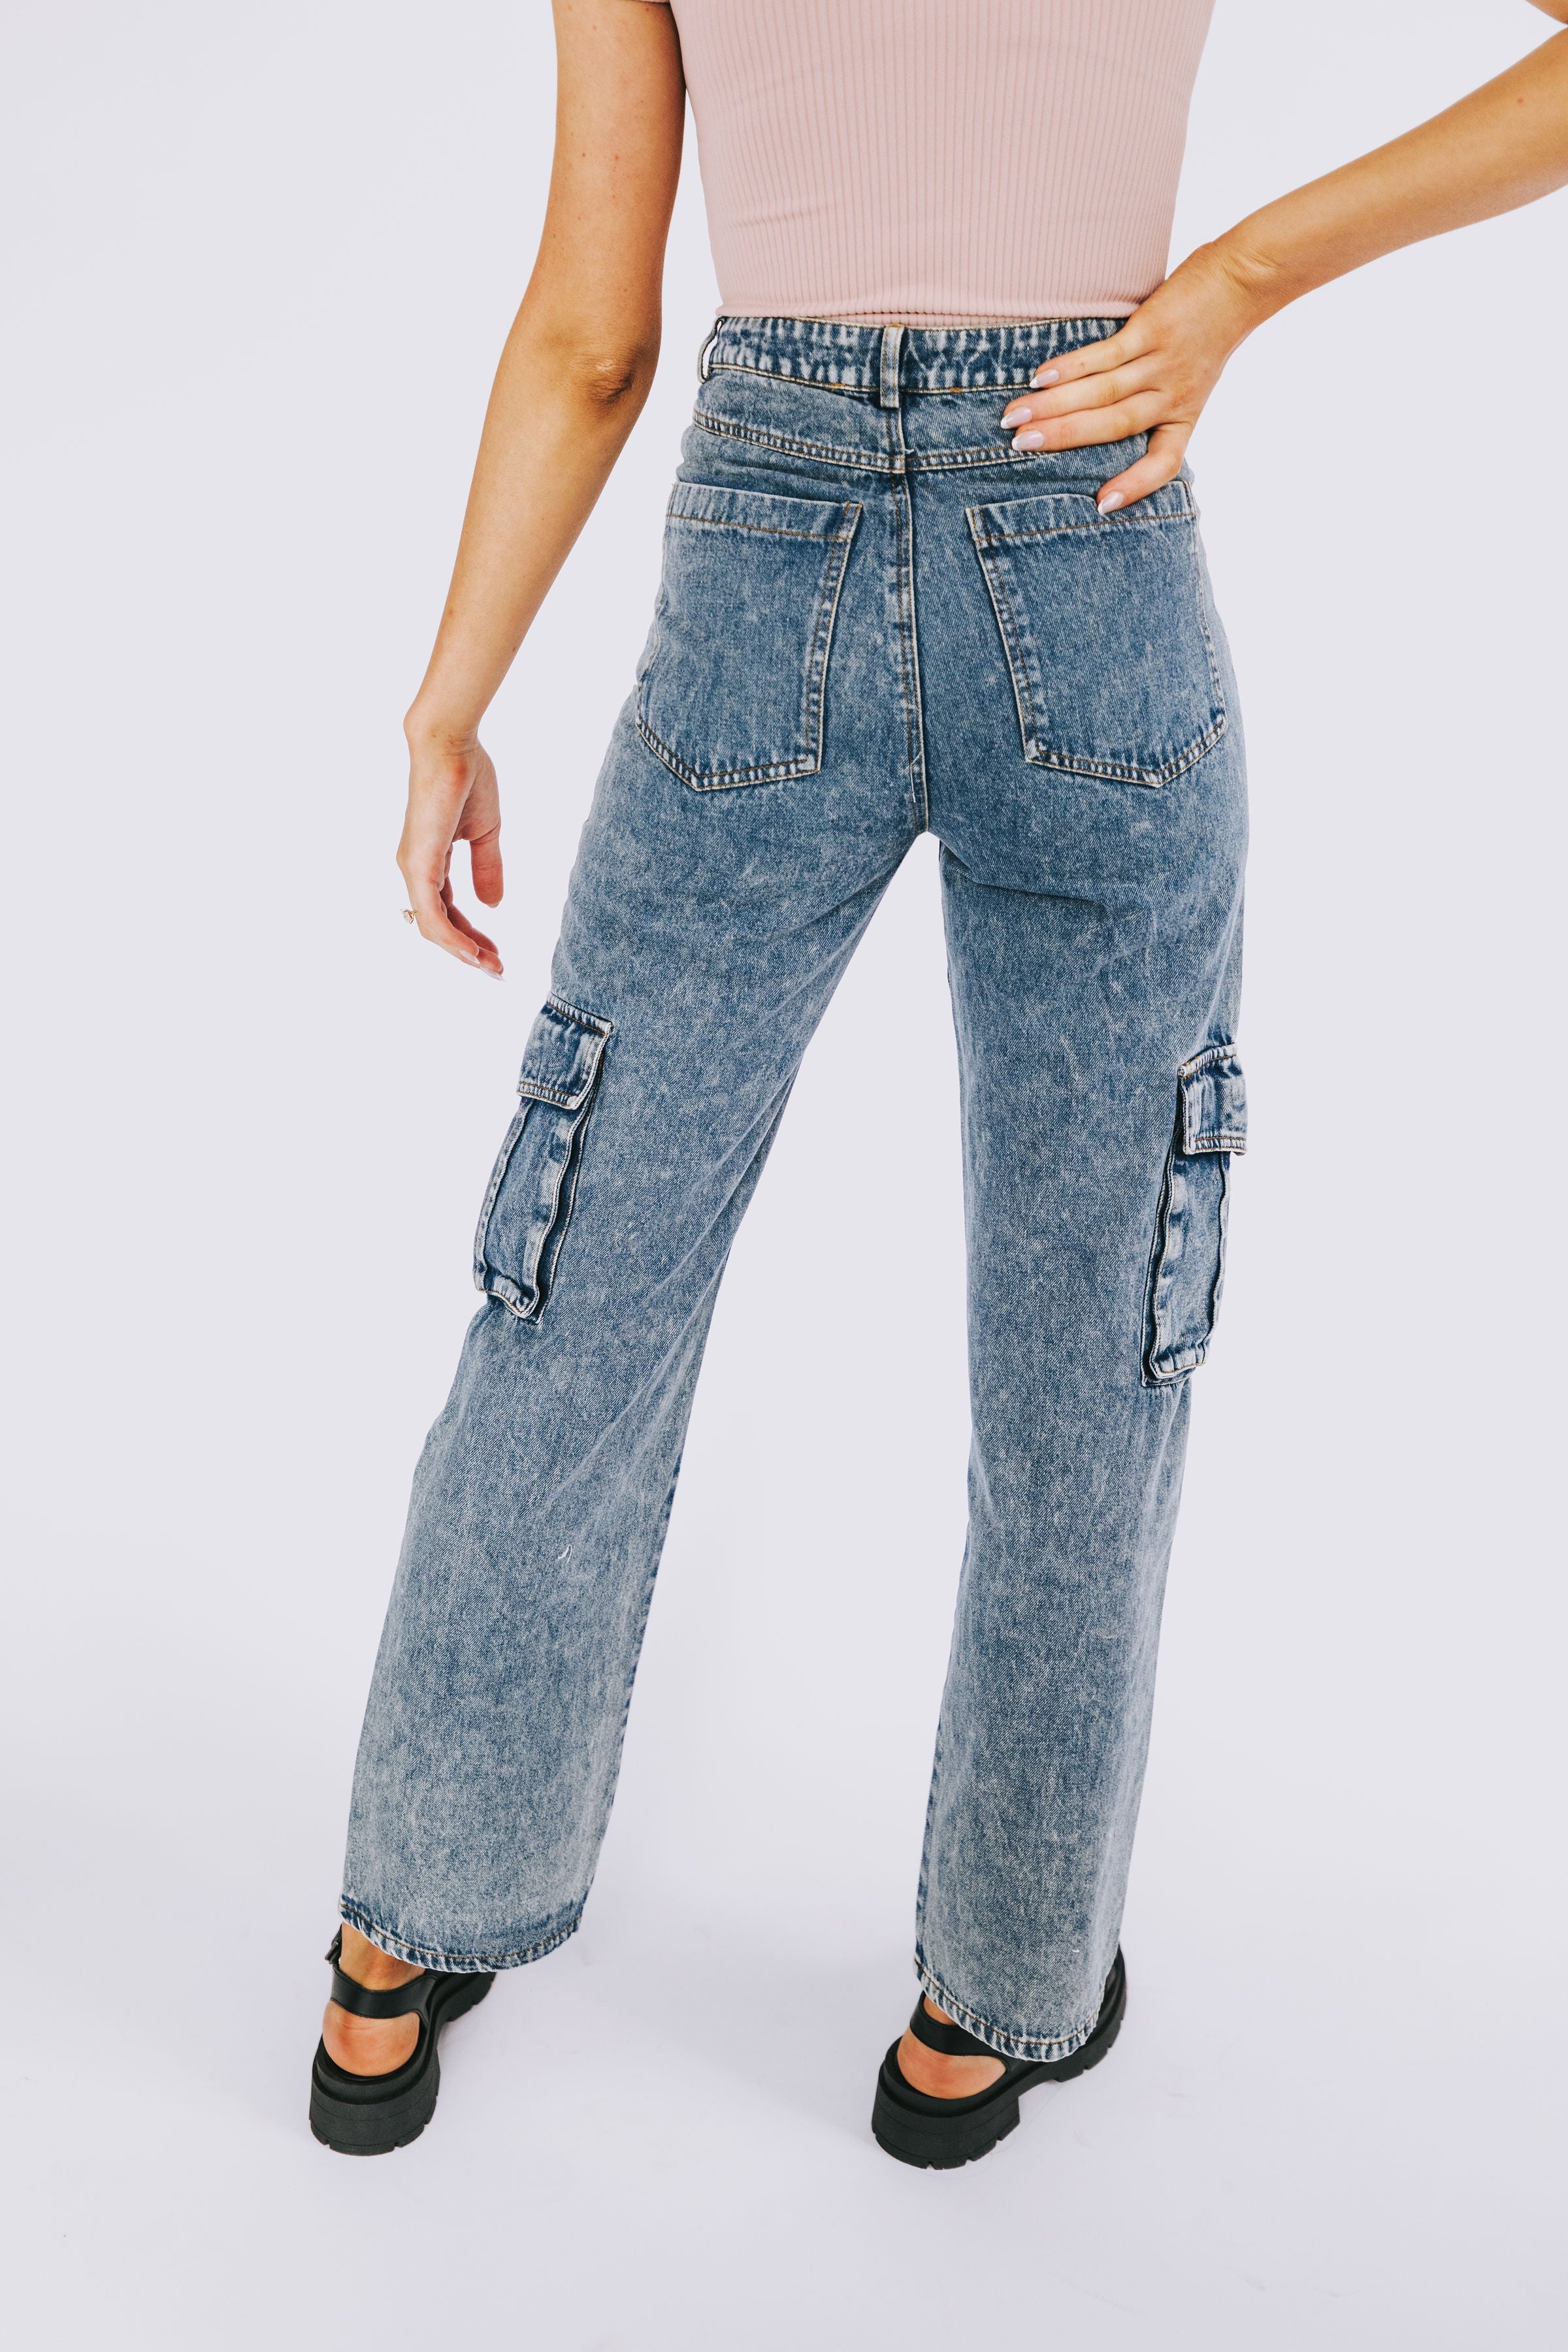 Find Strength Cargo Jeans - 3 Colors!